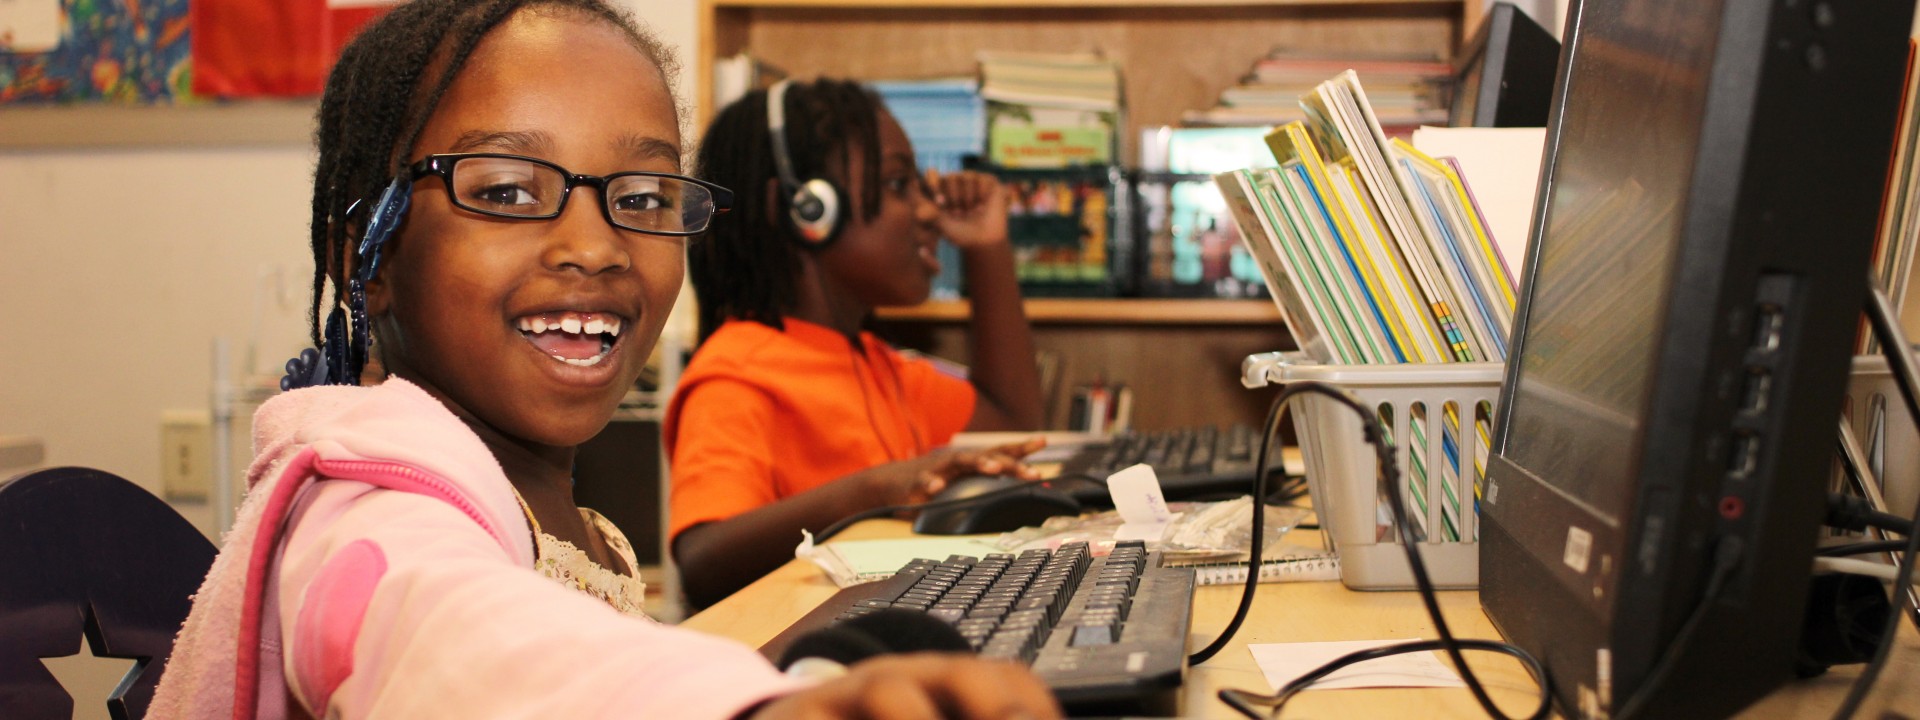 Smiling children using computers at the Honickman Learning Center Comcast Technology Labs